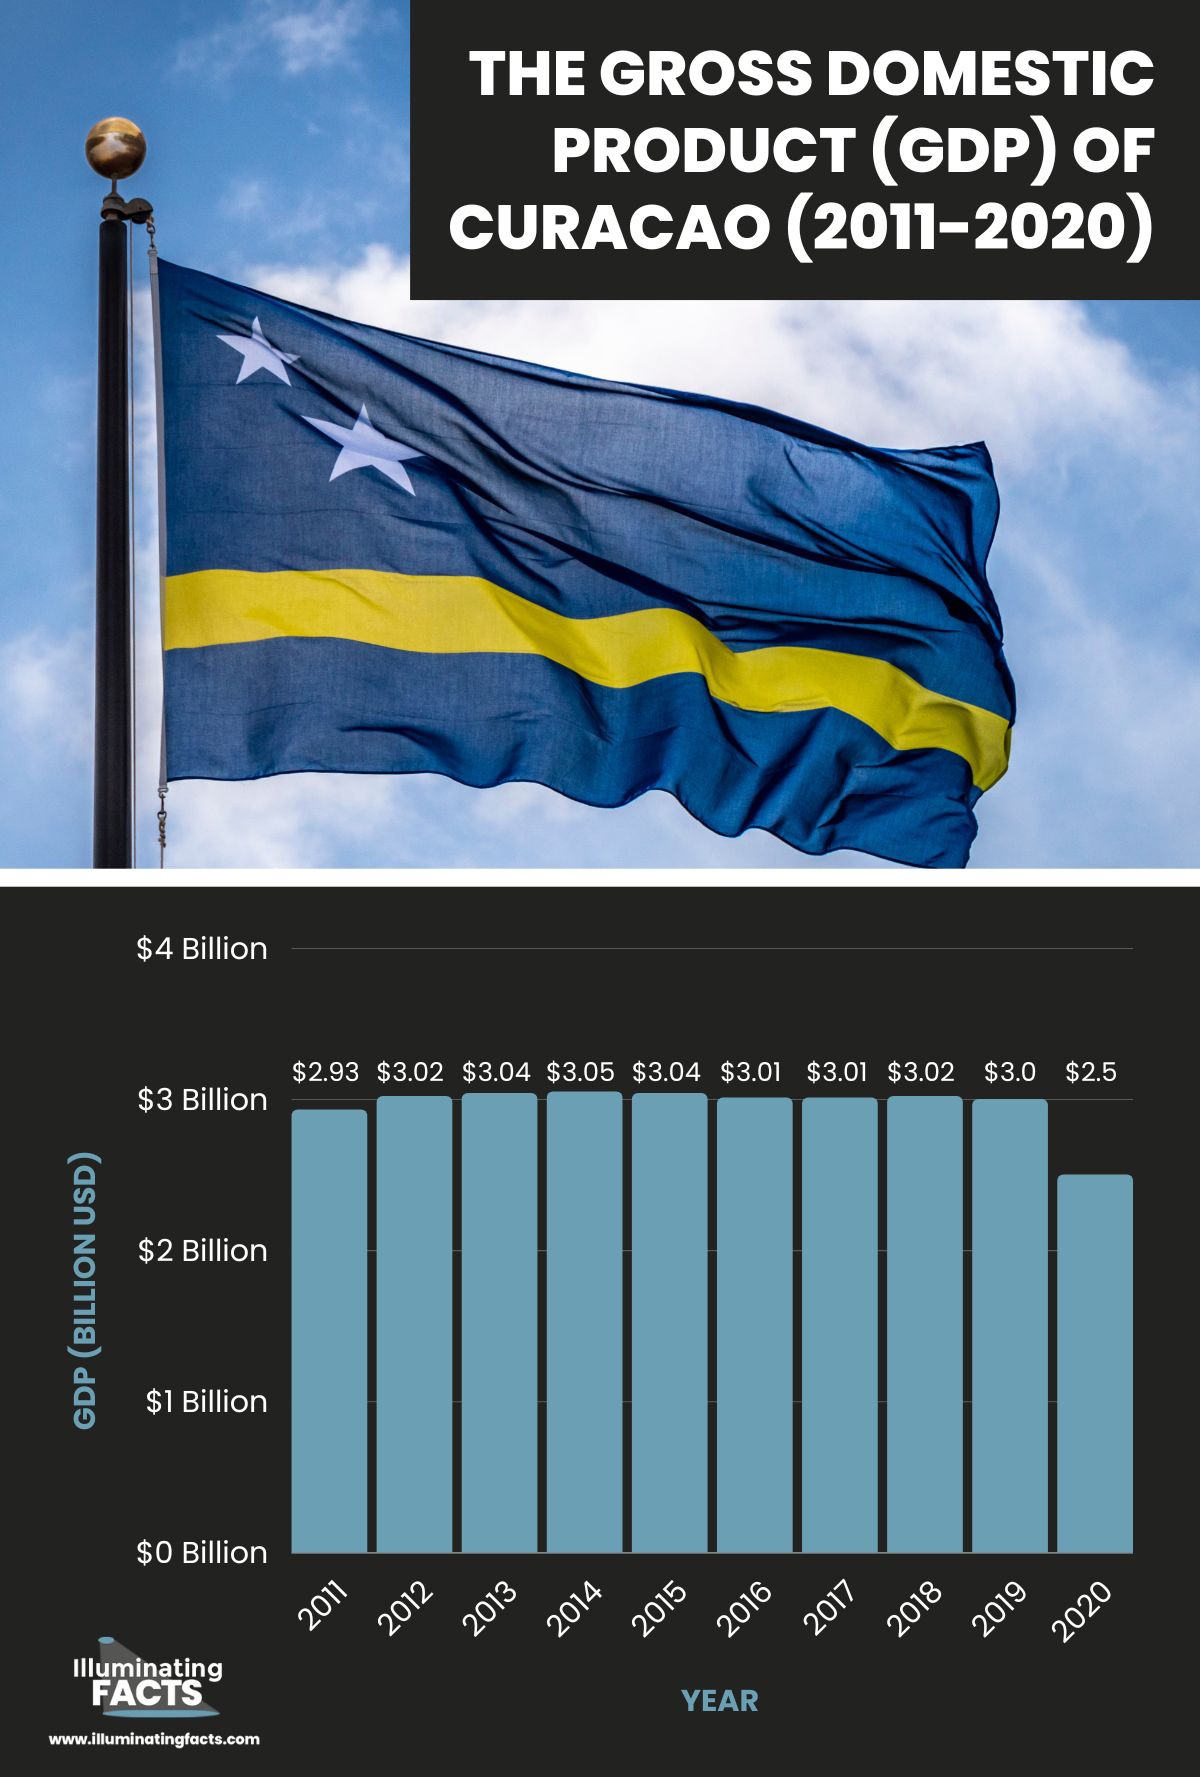 The Gross Domestic Product (GDP) of Curacao (2011-2020)